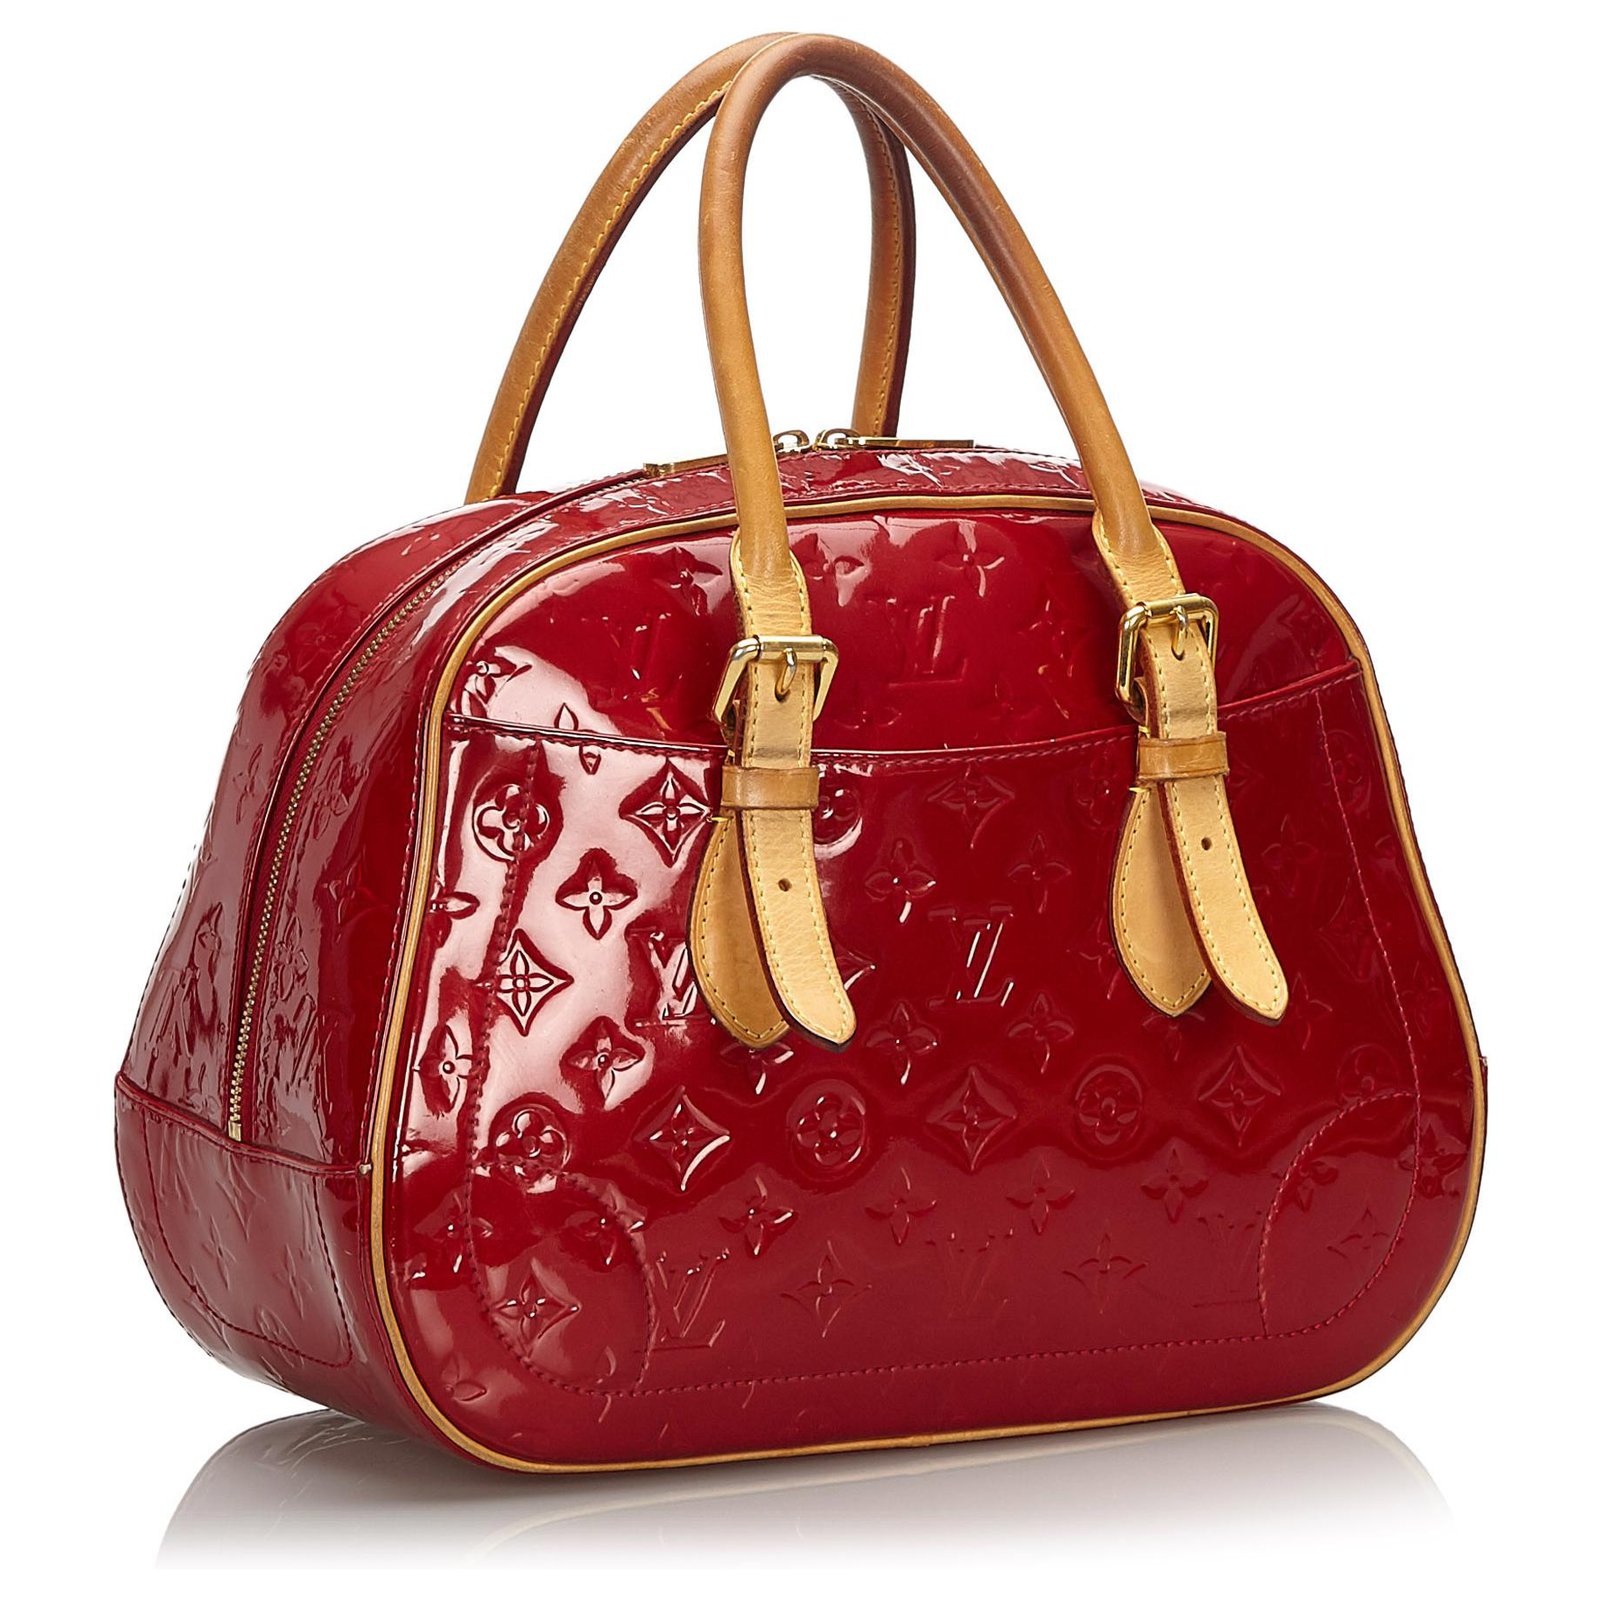 Auth Louis Vuitton Vernis Leather Summit Drive Boston Bag Red